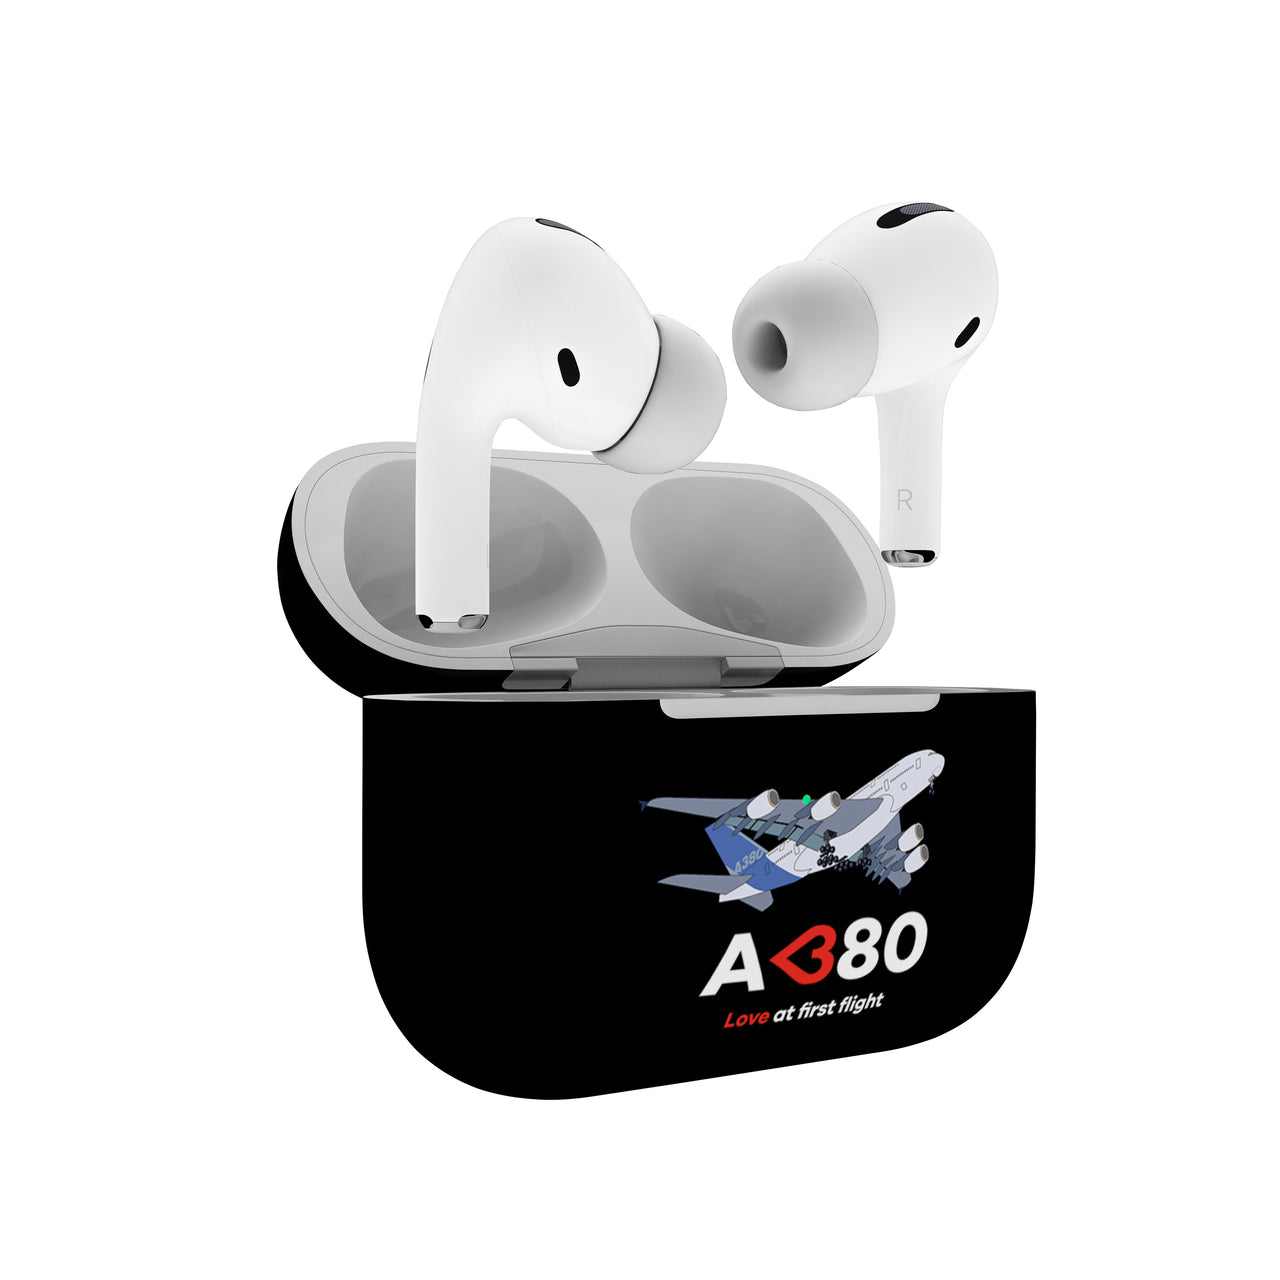 Airbus A380 Love at first flight Designed AirPods "Pro" Cases